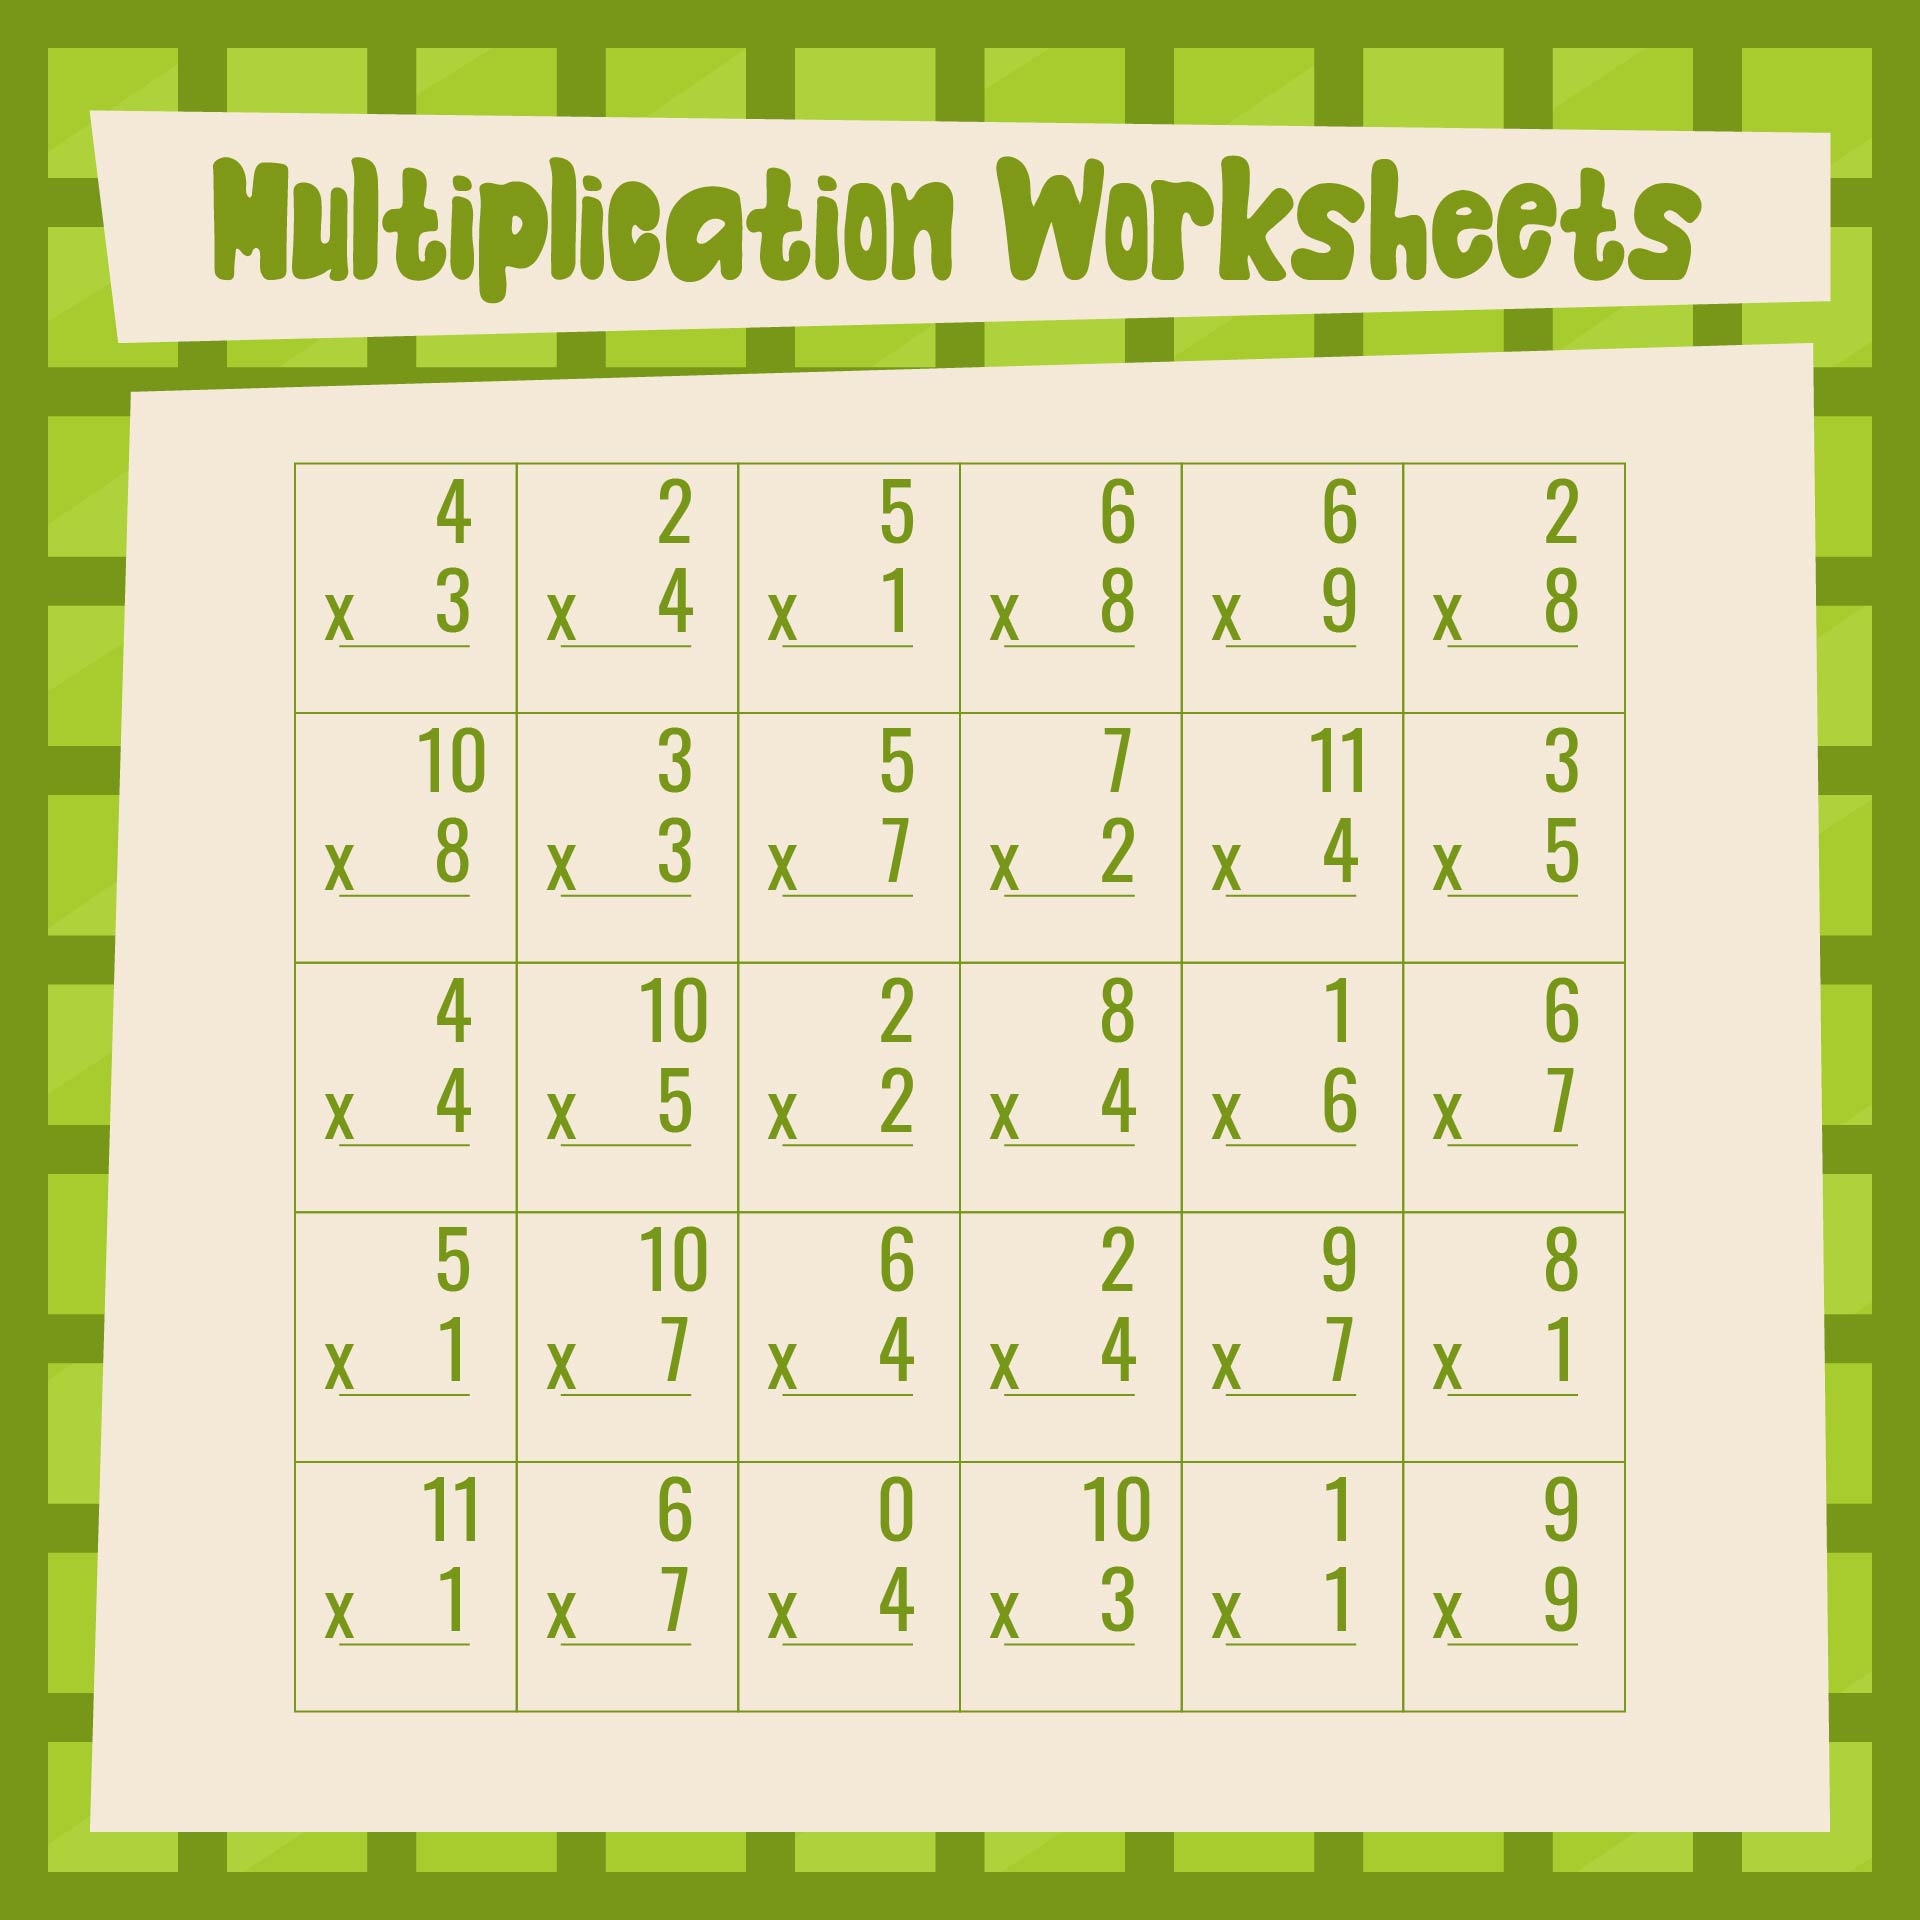 Multiplication Worksheets 1 12 50 Problems 1000 Images About School